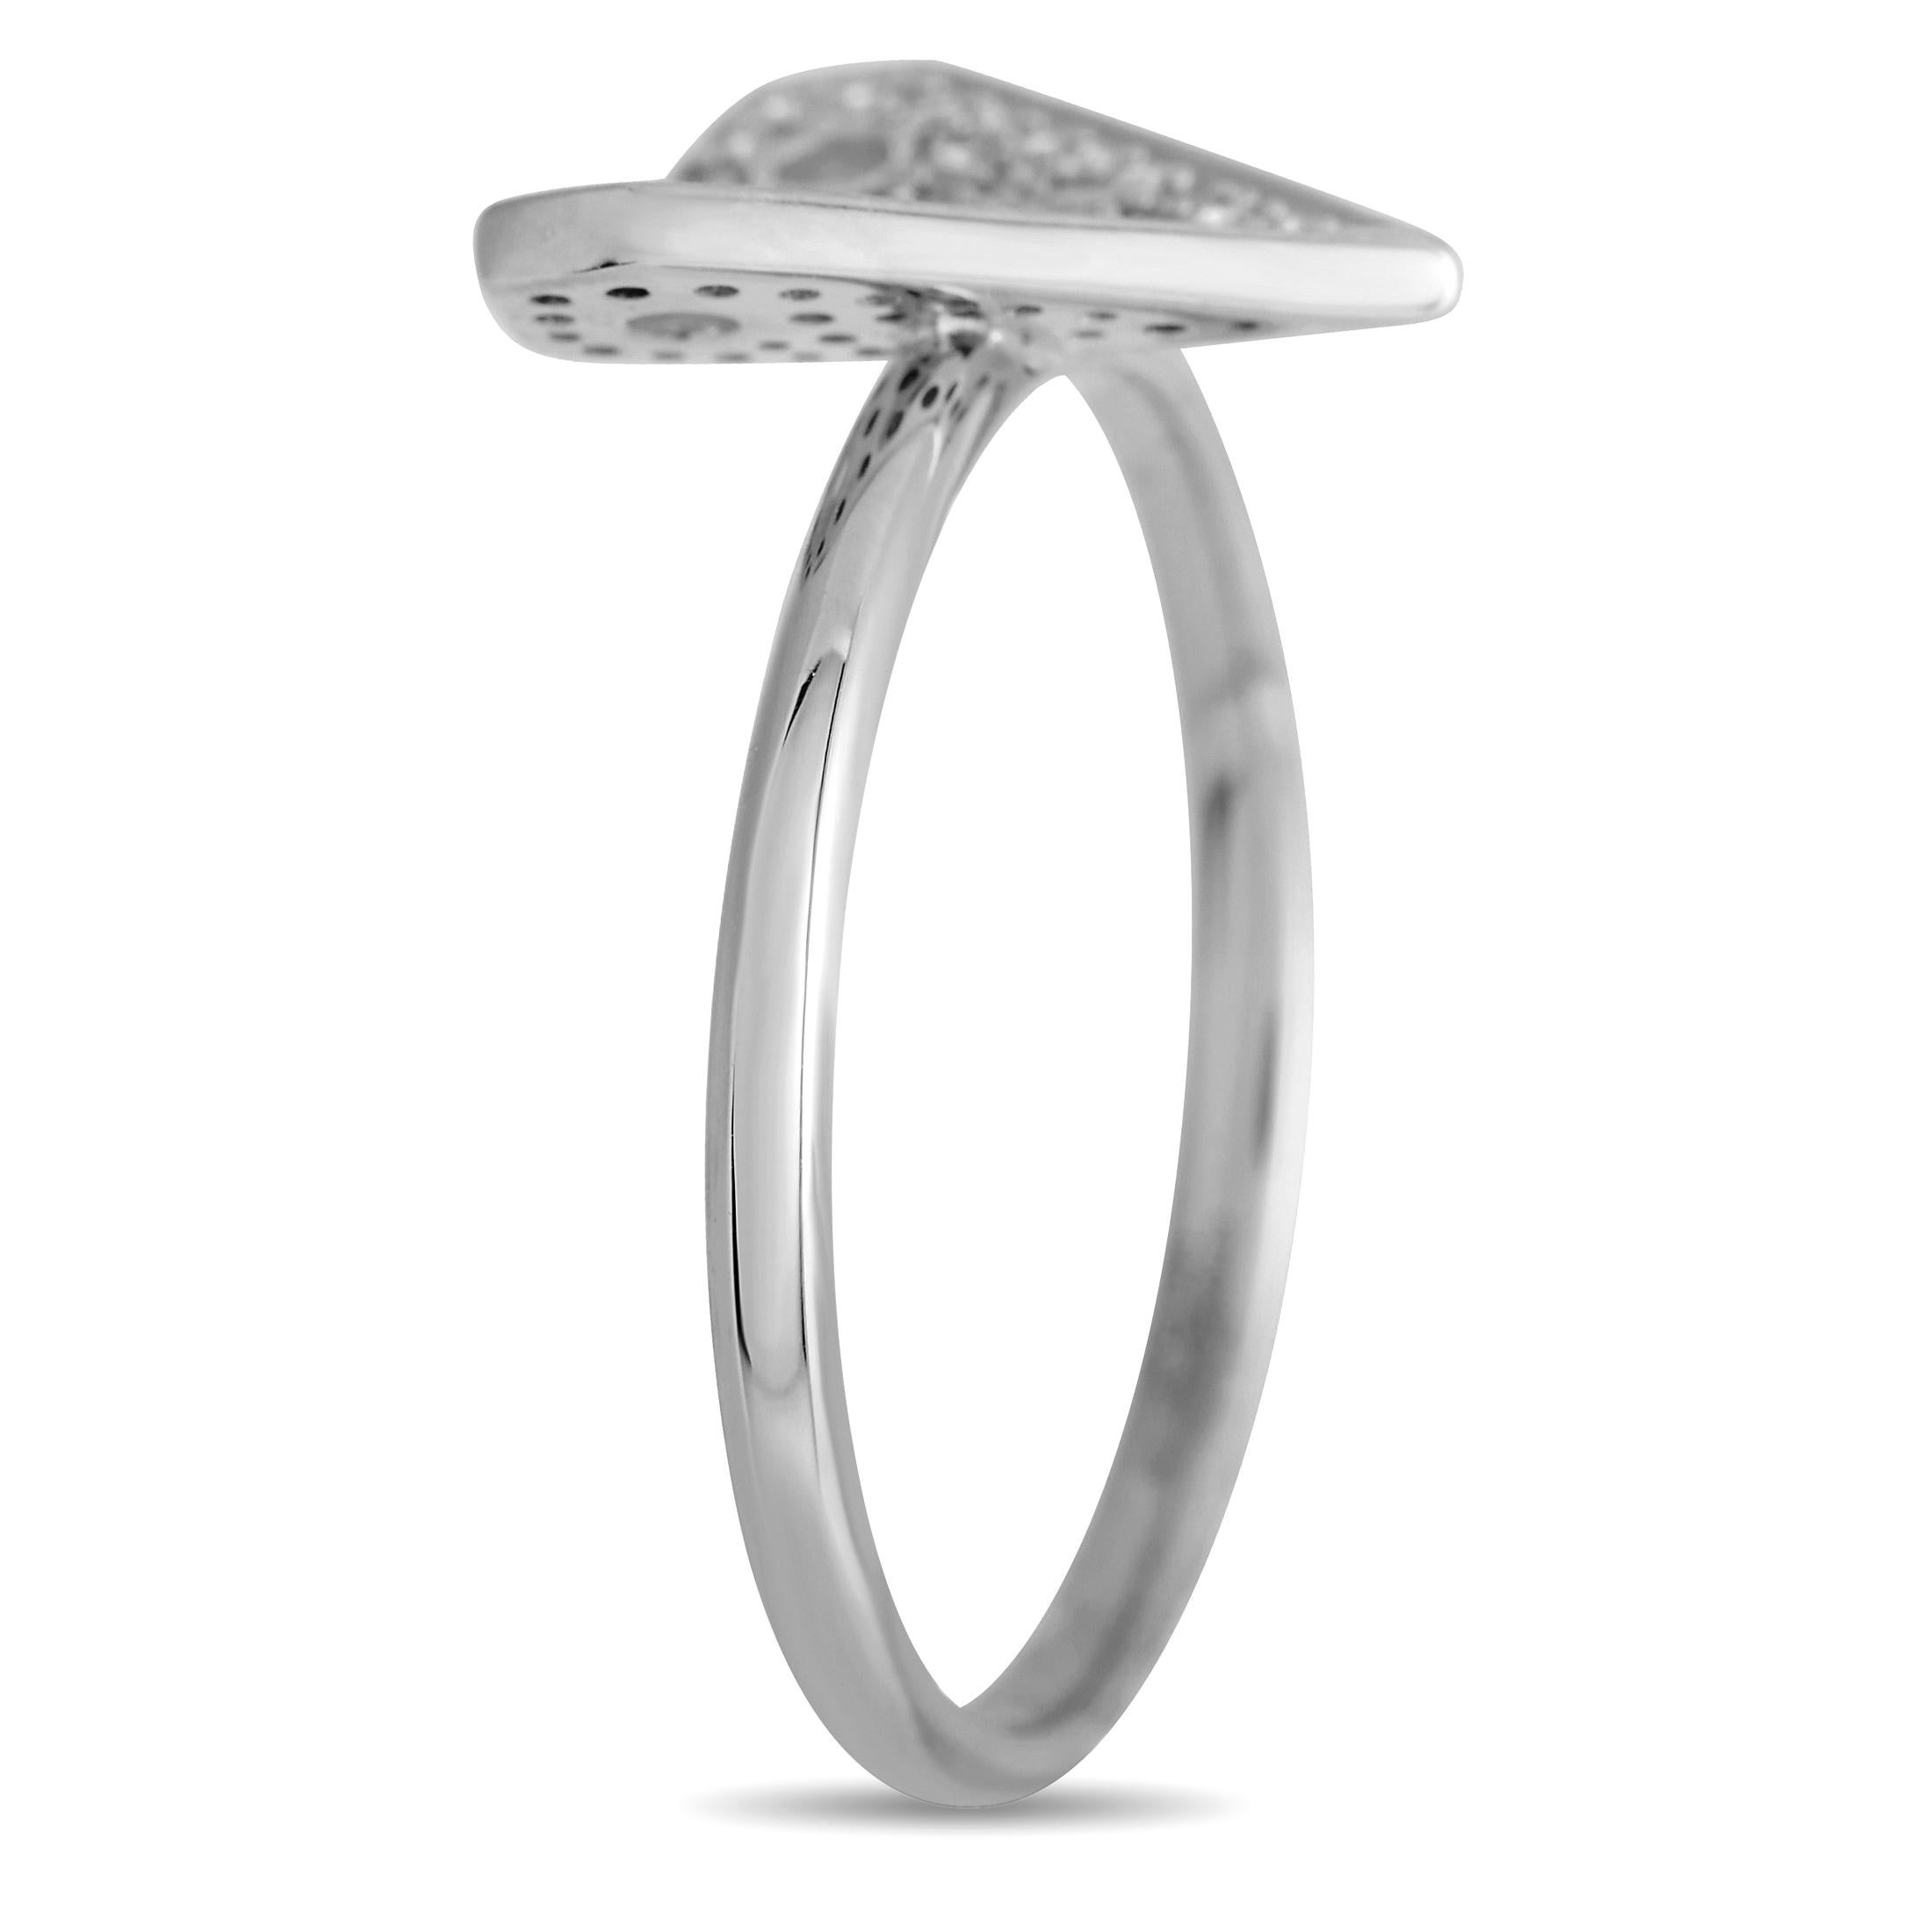 Striking a delicate balance between minimalism and sophistication, this geometric ring boasts a tidy and chic aesthetic that works with any outfit or style. The ring has a 1mm slim band topped with a sculpted two-faced heart. One part of the heart